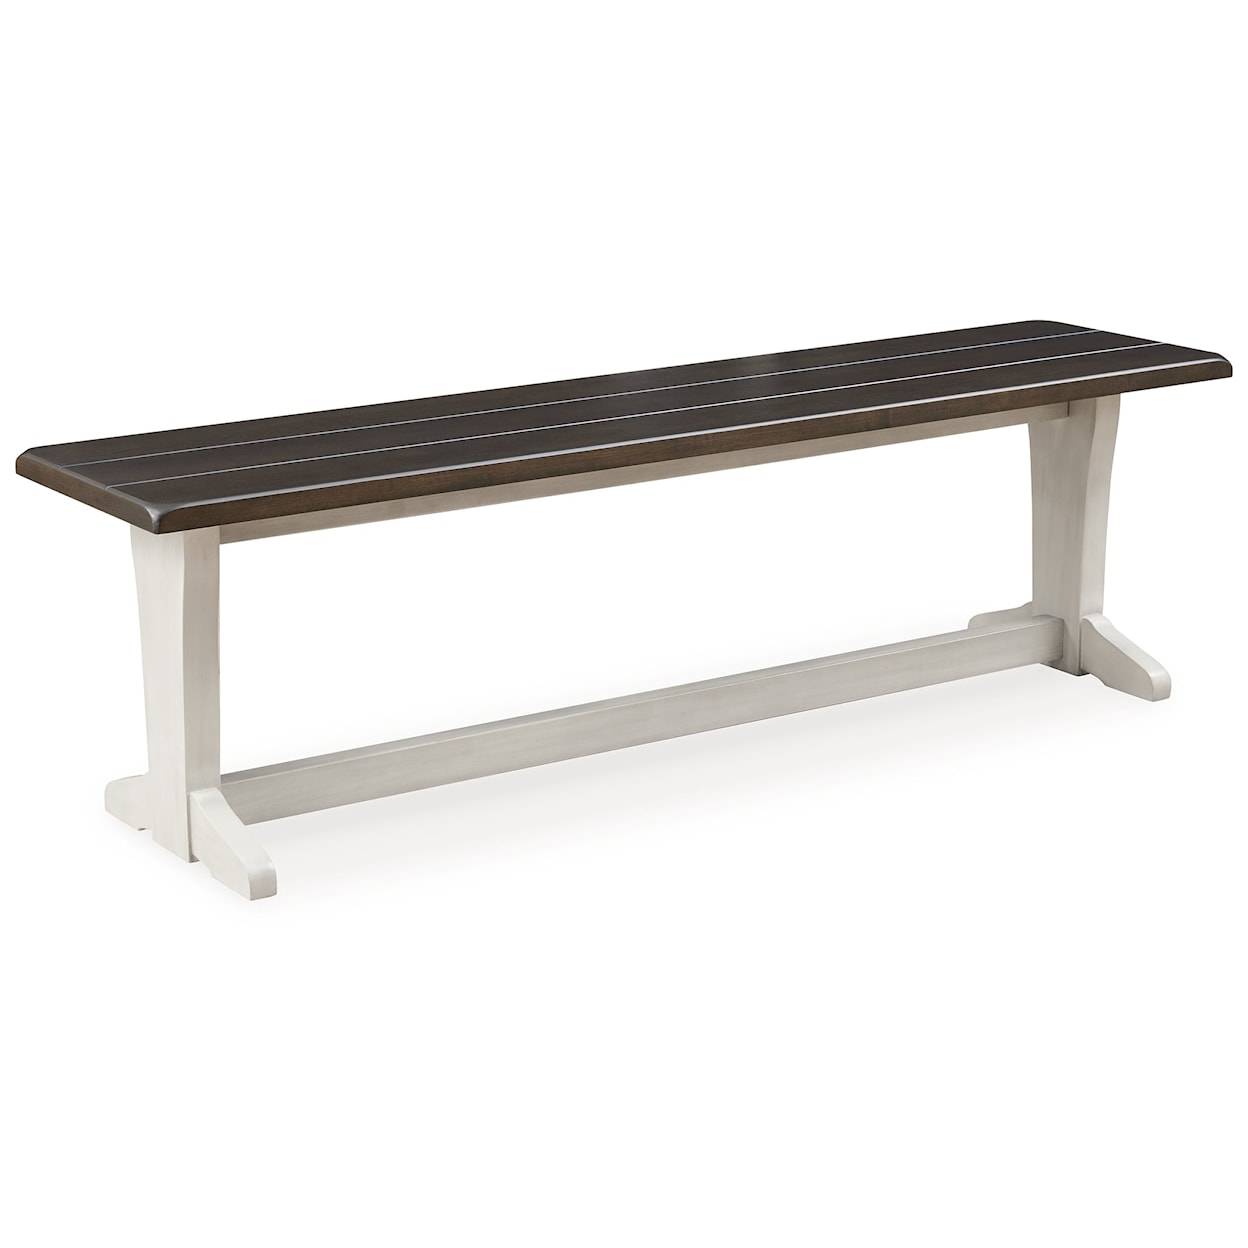 Signature Darborn Large Dining Room Bench